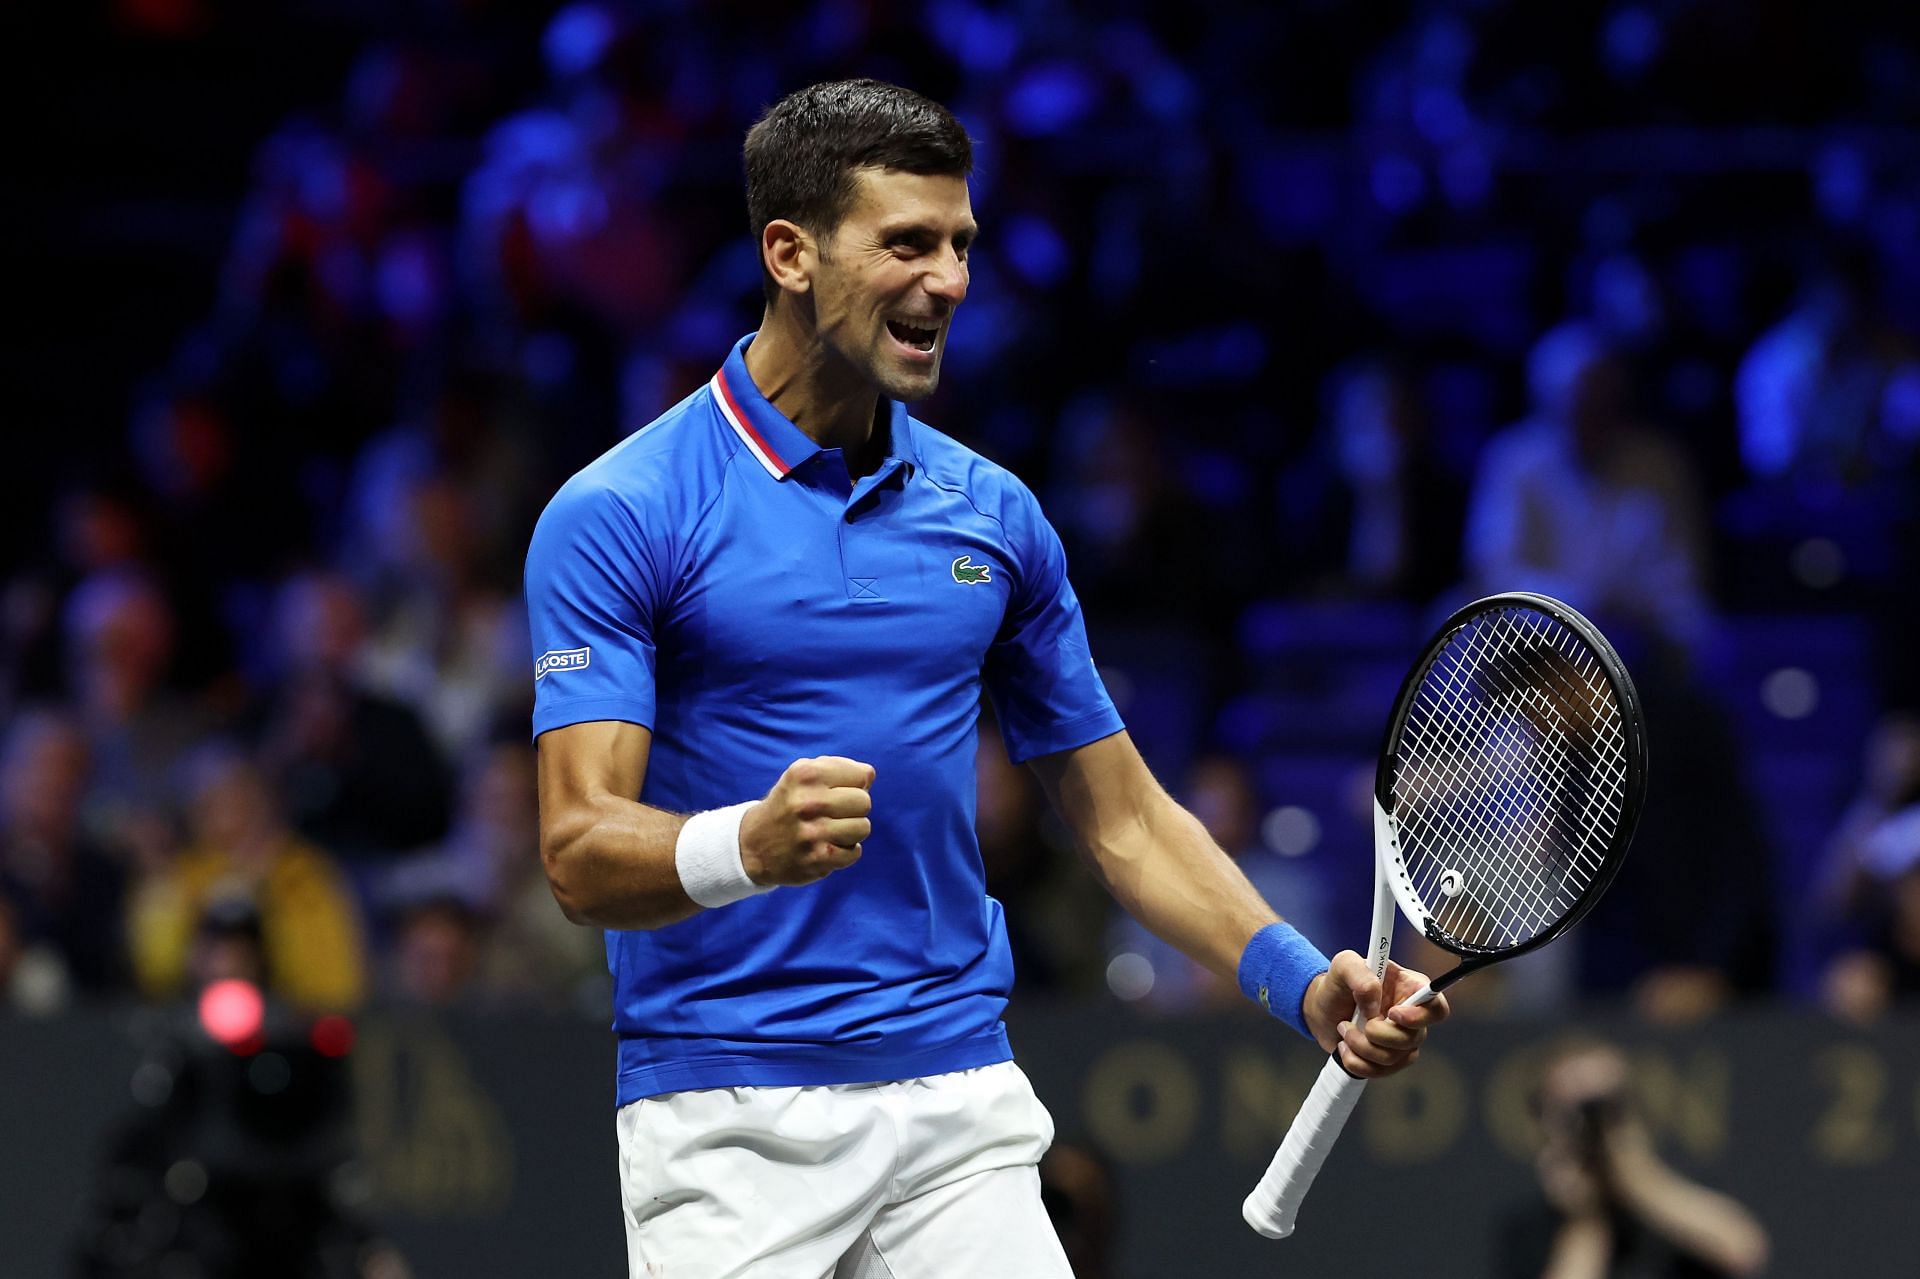 Novak Djokovic has been given consent to compete in upcoming tournaments